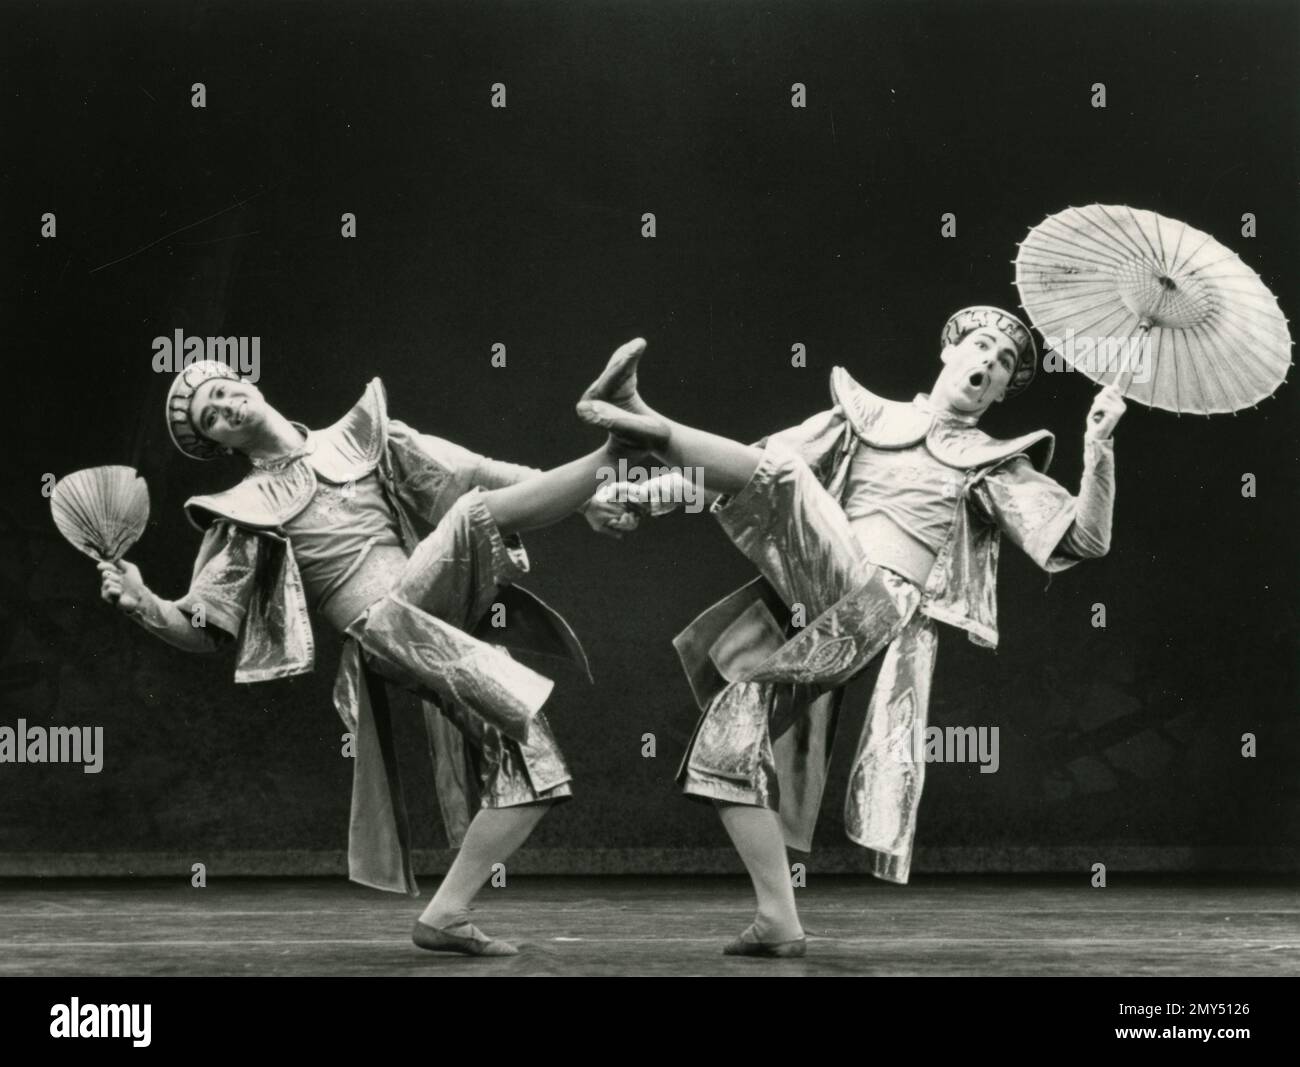 A performance of the Chinese Dance from the Nutcracker, by London City Ballet, UK 1980s Stock Photo